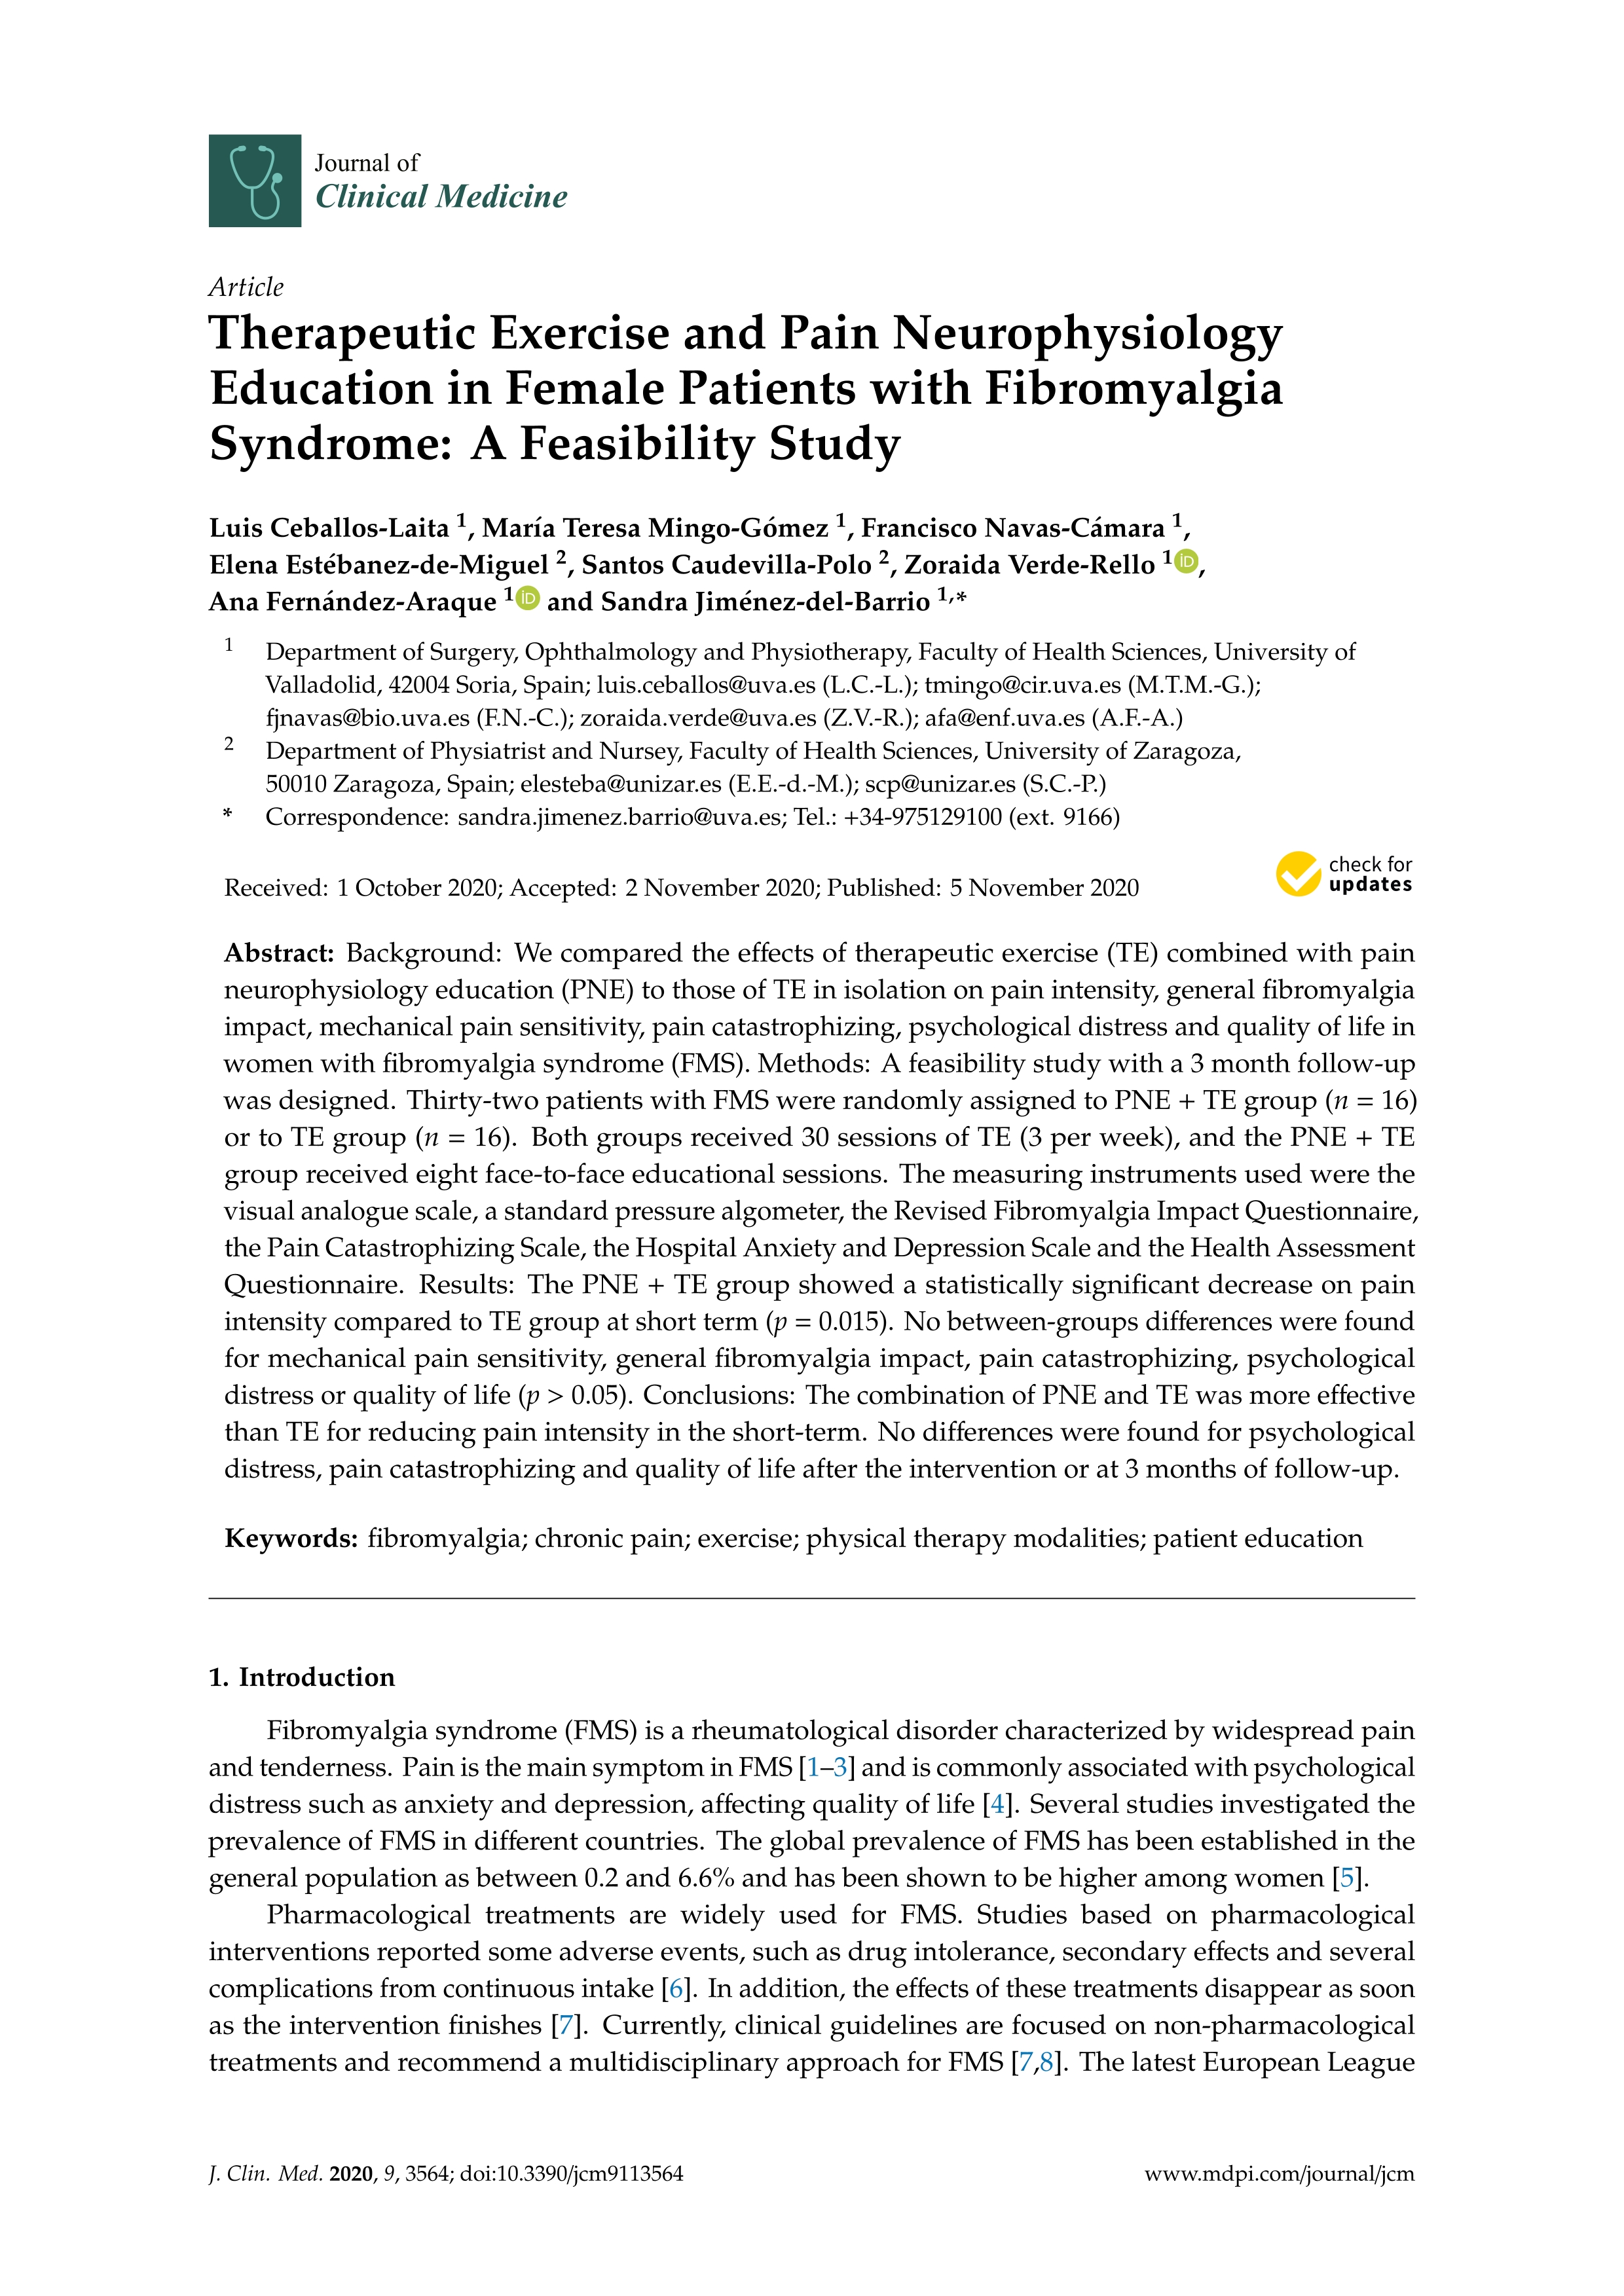 Therapeutic Exercise and Pain Neurophysiology Education in Female Patients with Fibromyalgia Syndrome: A Feasibility Study